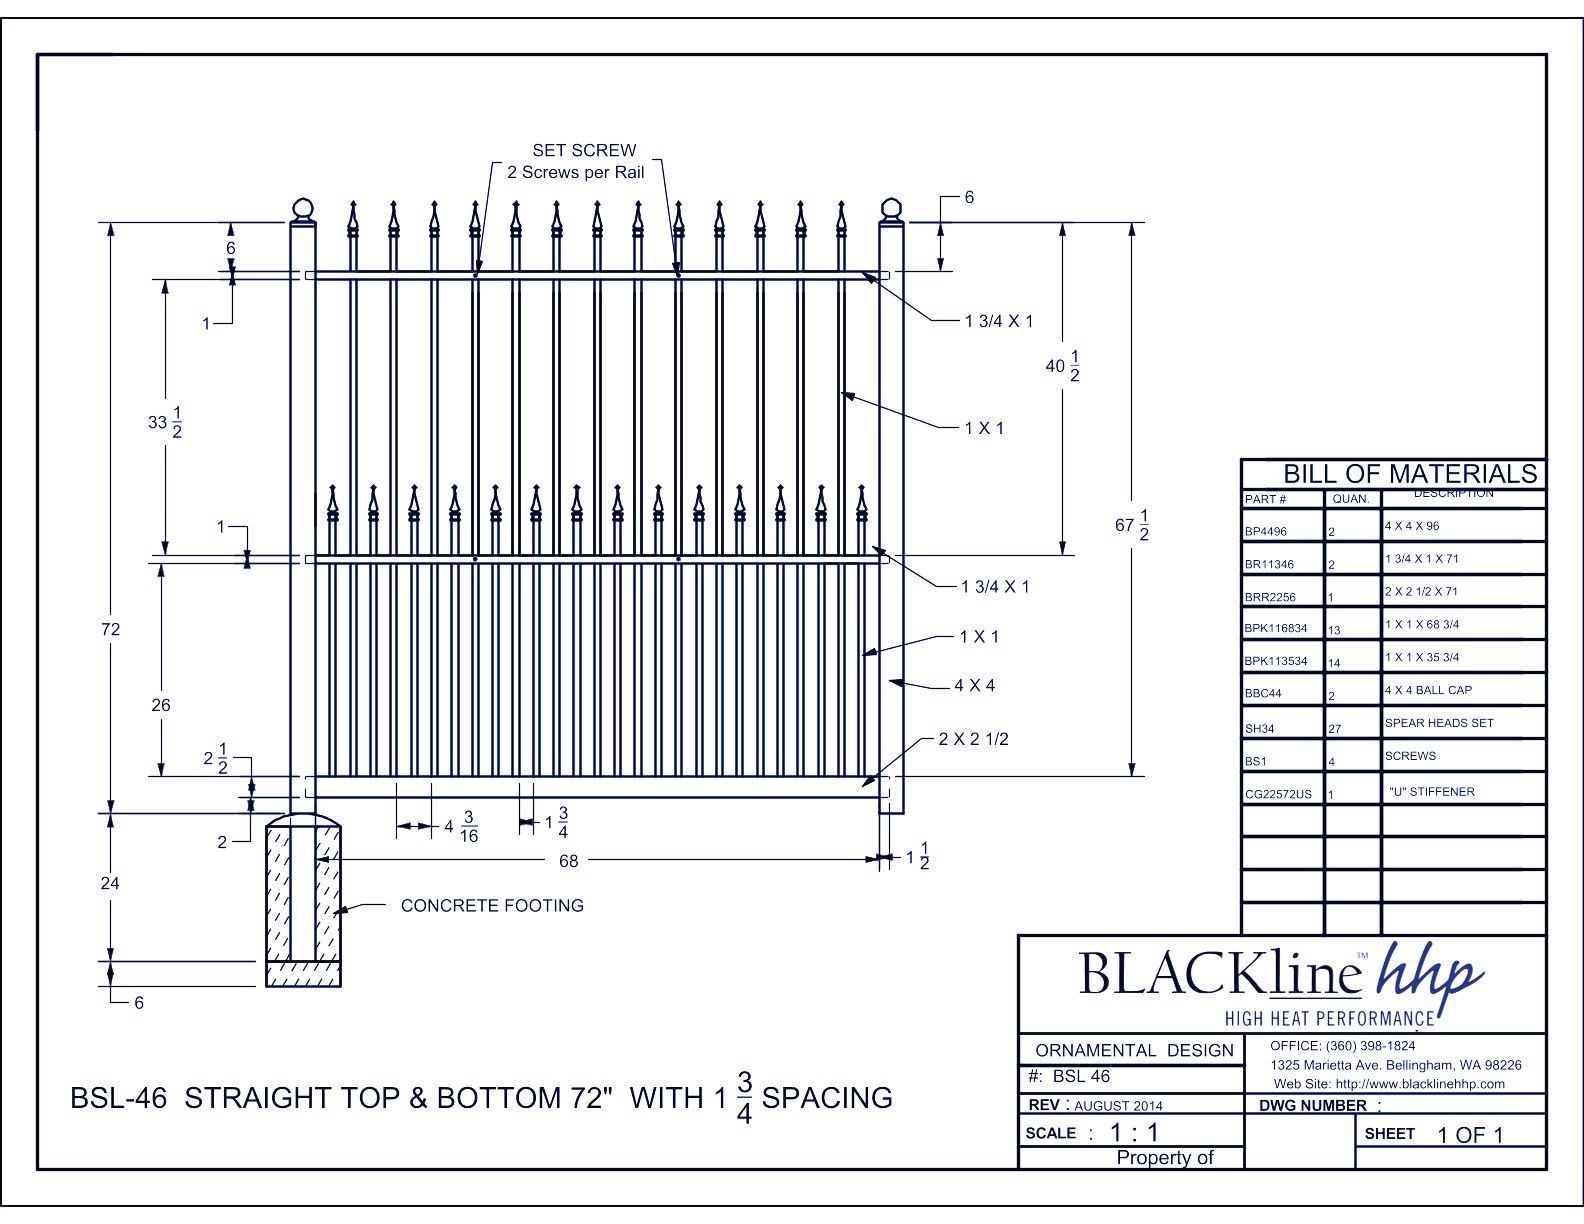 BSL-46: Straight Top & Bottom 72" with 1 3/4” Spacing